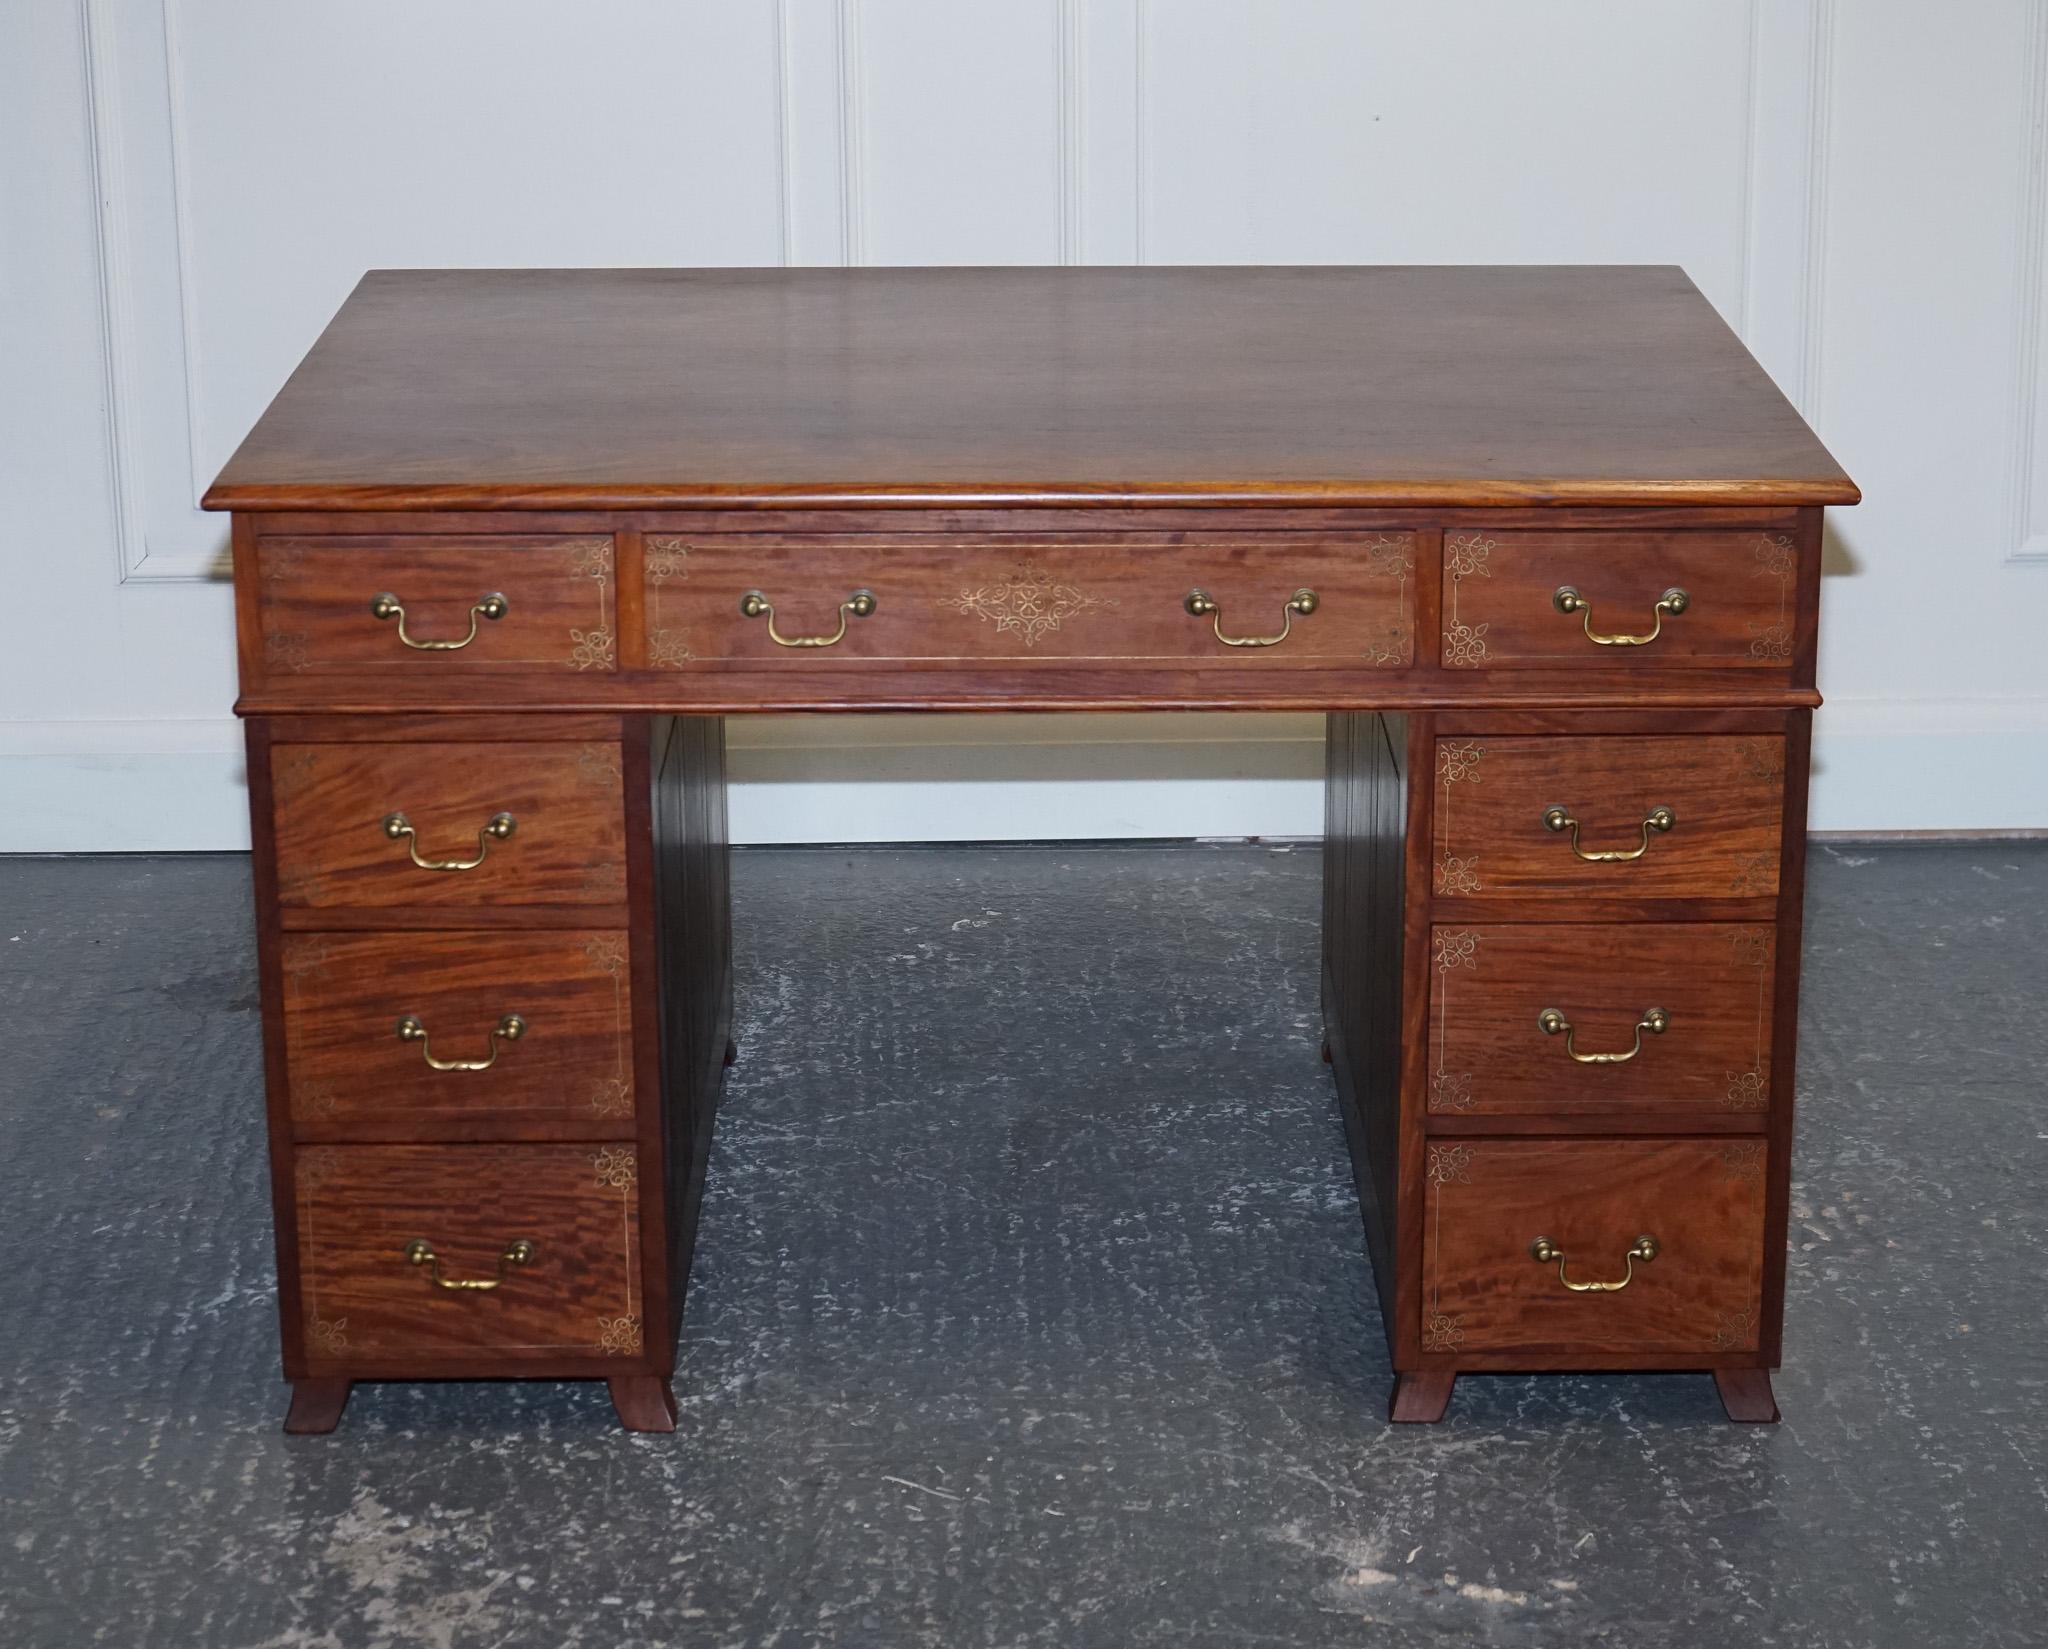 Anglo-Indian Antique M. Hayat & Bros Ltd Twin Pedestal Partners Desk with Drawers Both Sides